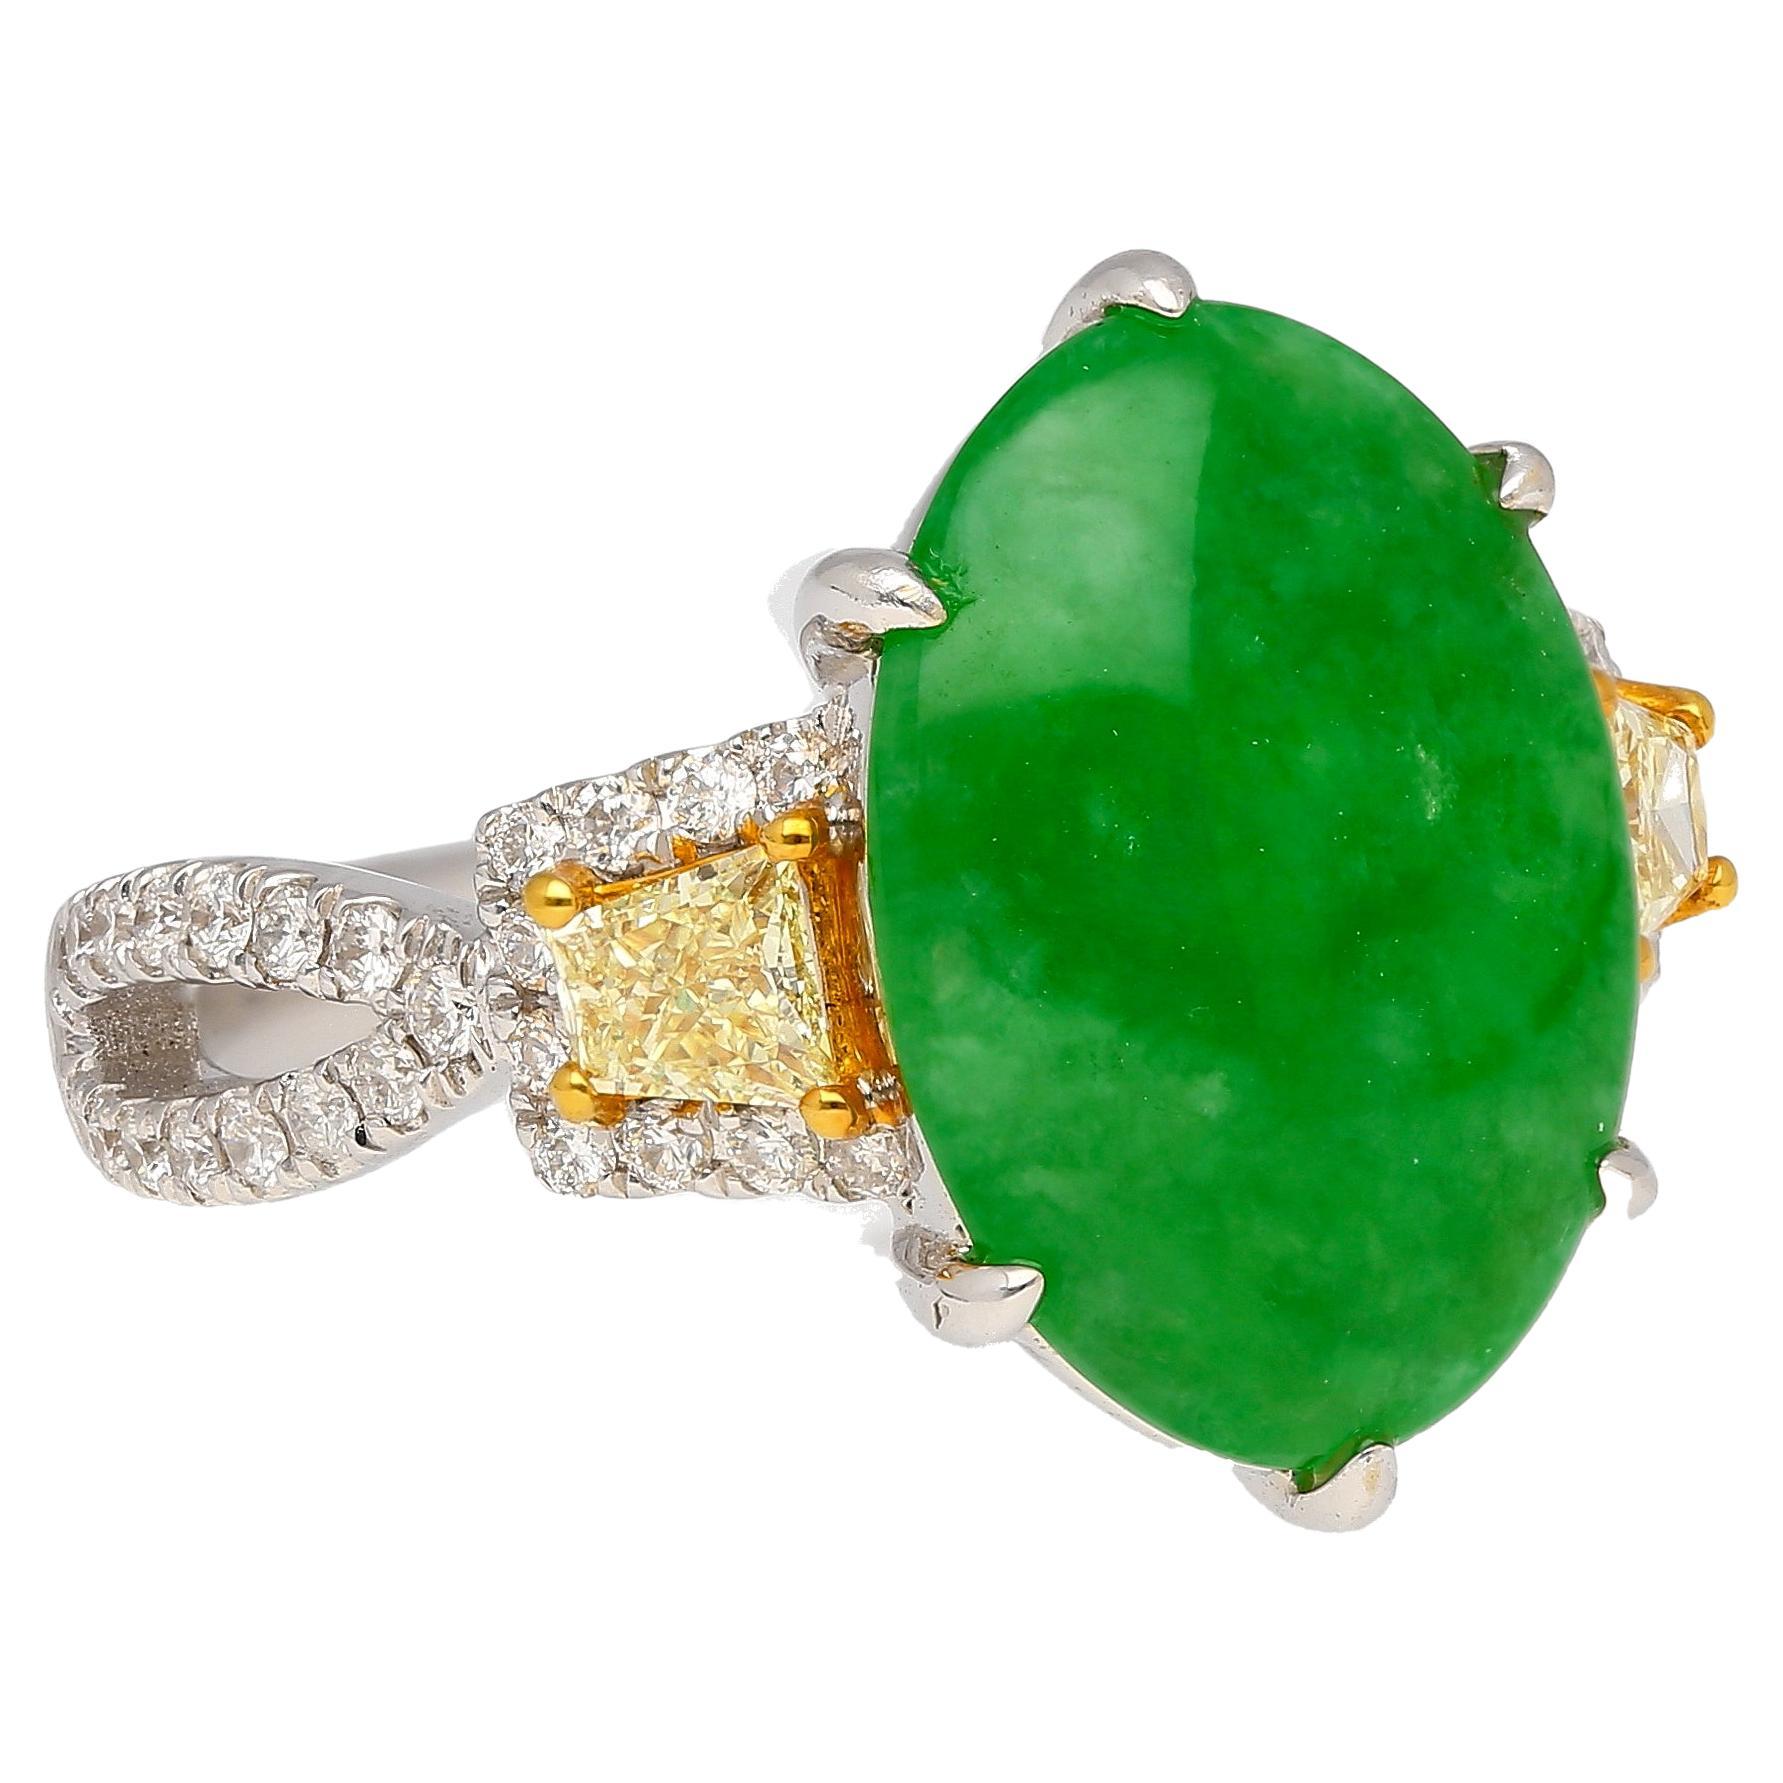 4.76CT Jadeite Jade with Trapezoid Cut Yellow Diamond Side Stone Ring in 18KW 